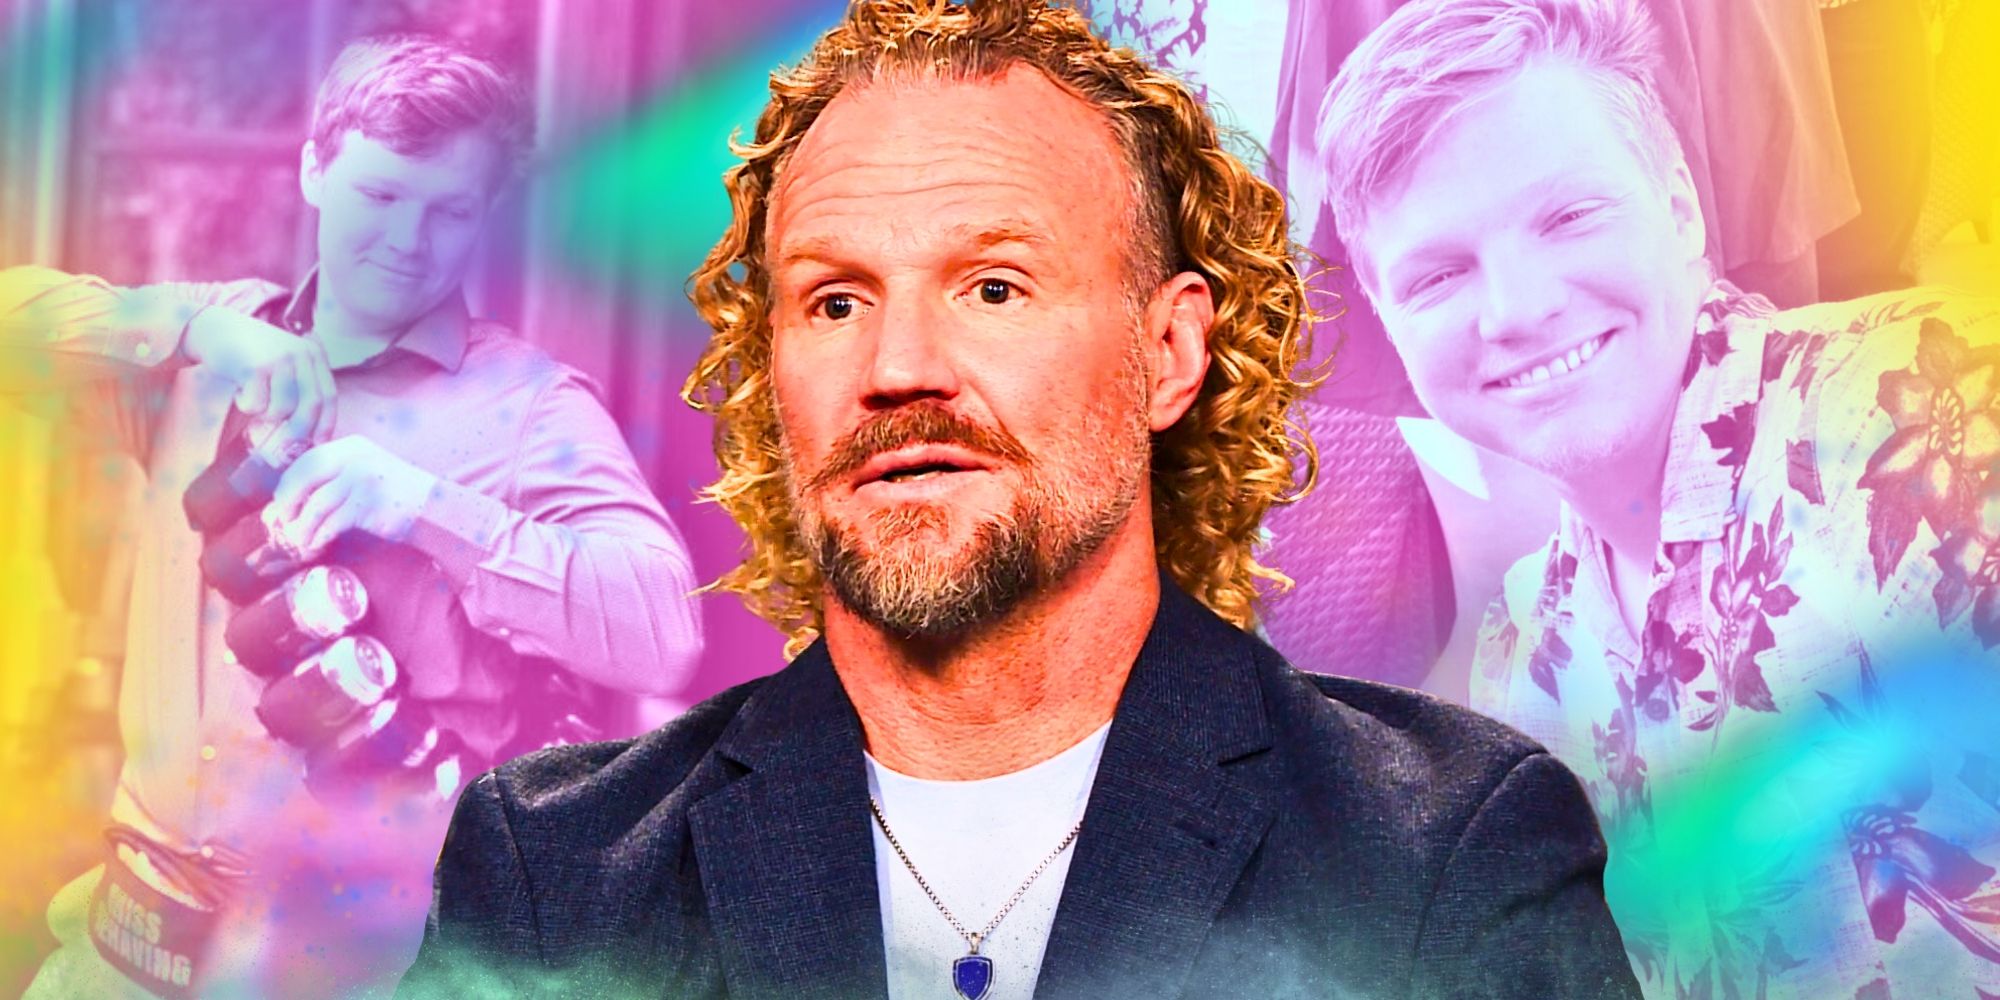 Sister wives kody brown with garrison montage pastel background kody wearing a suit